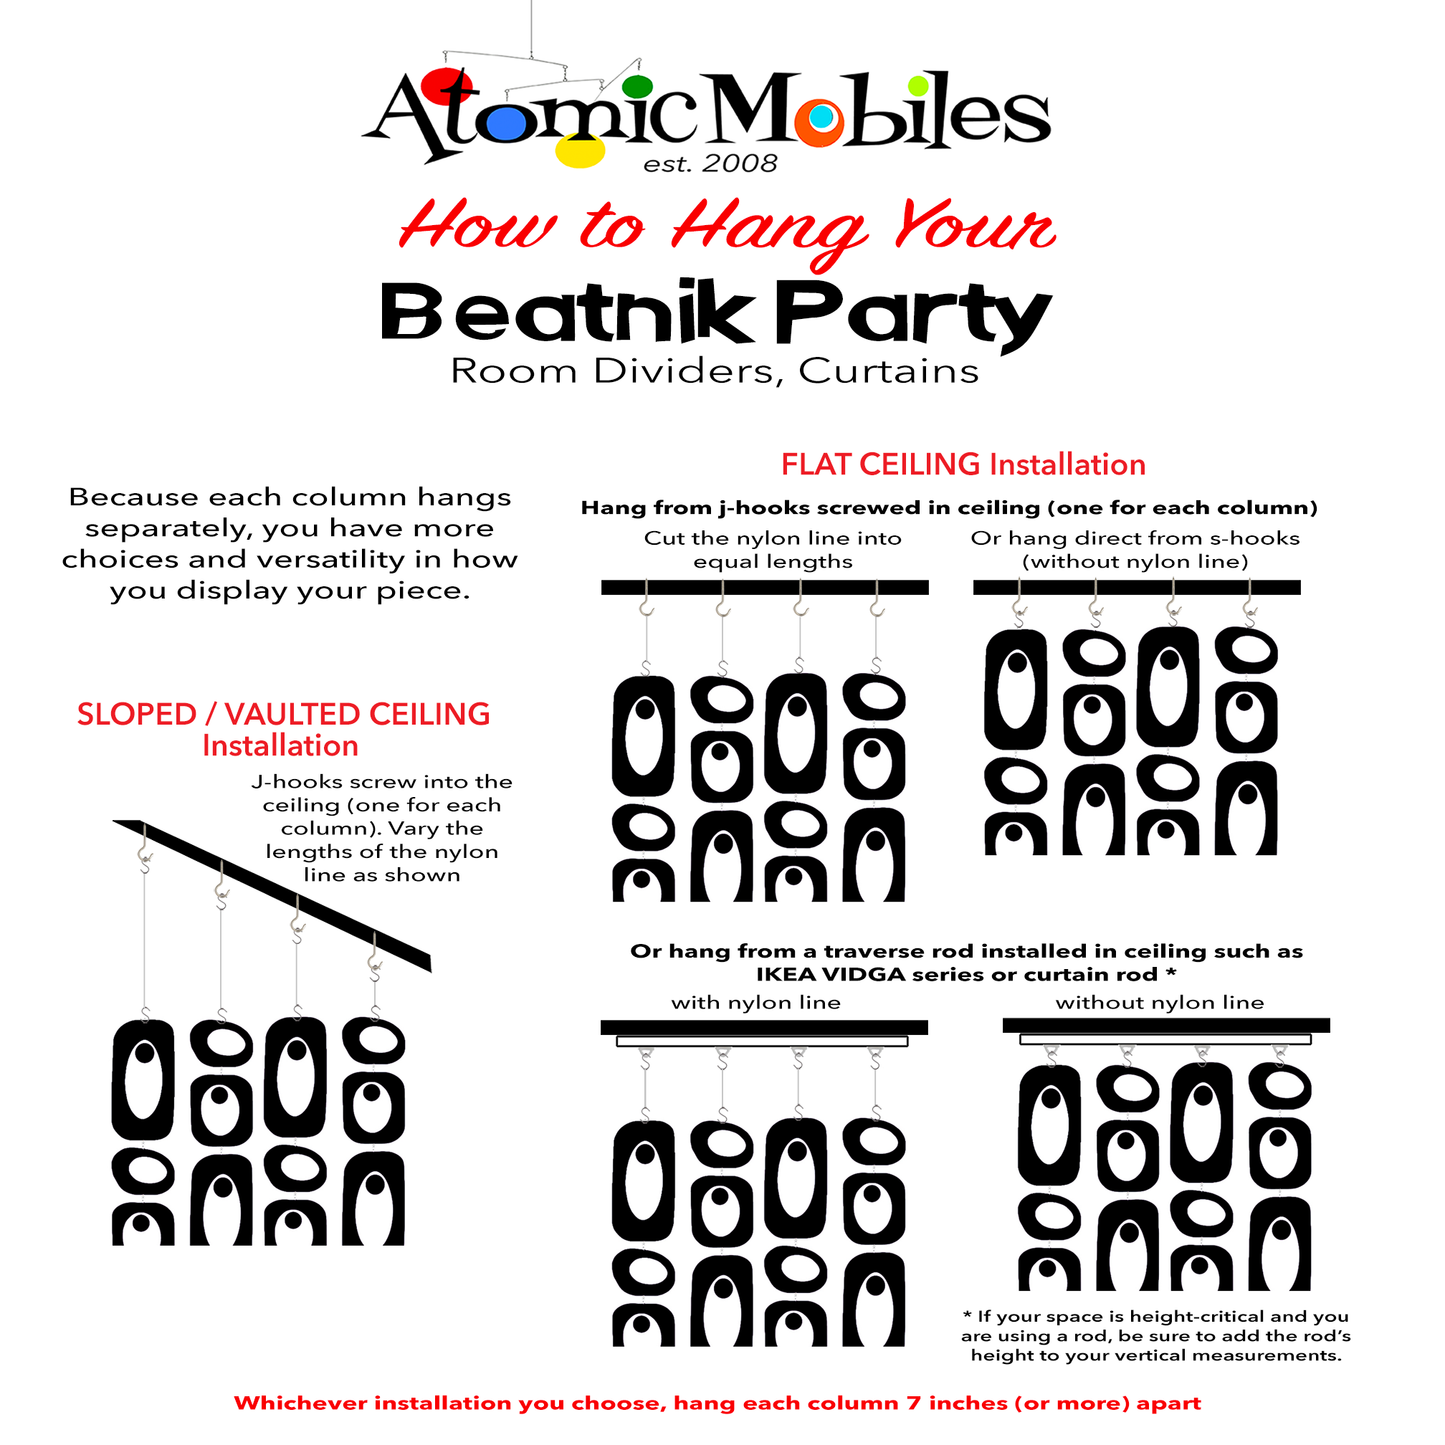 How to hang your Mid Century Modern style Beatnik Party Room Dividers, Mobiles, and Curtains by AtomicMobiles.com